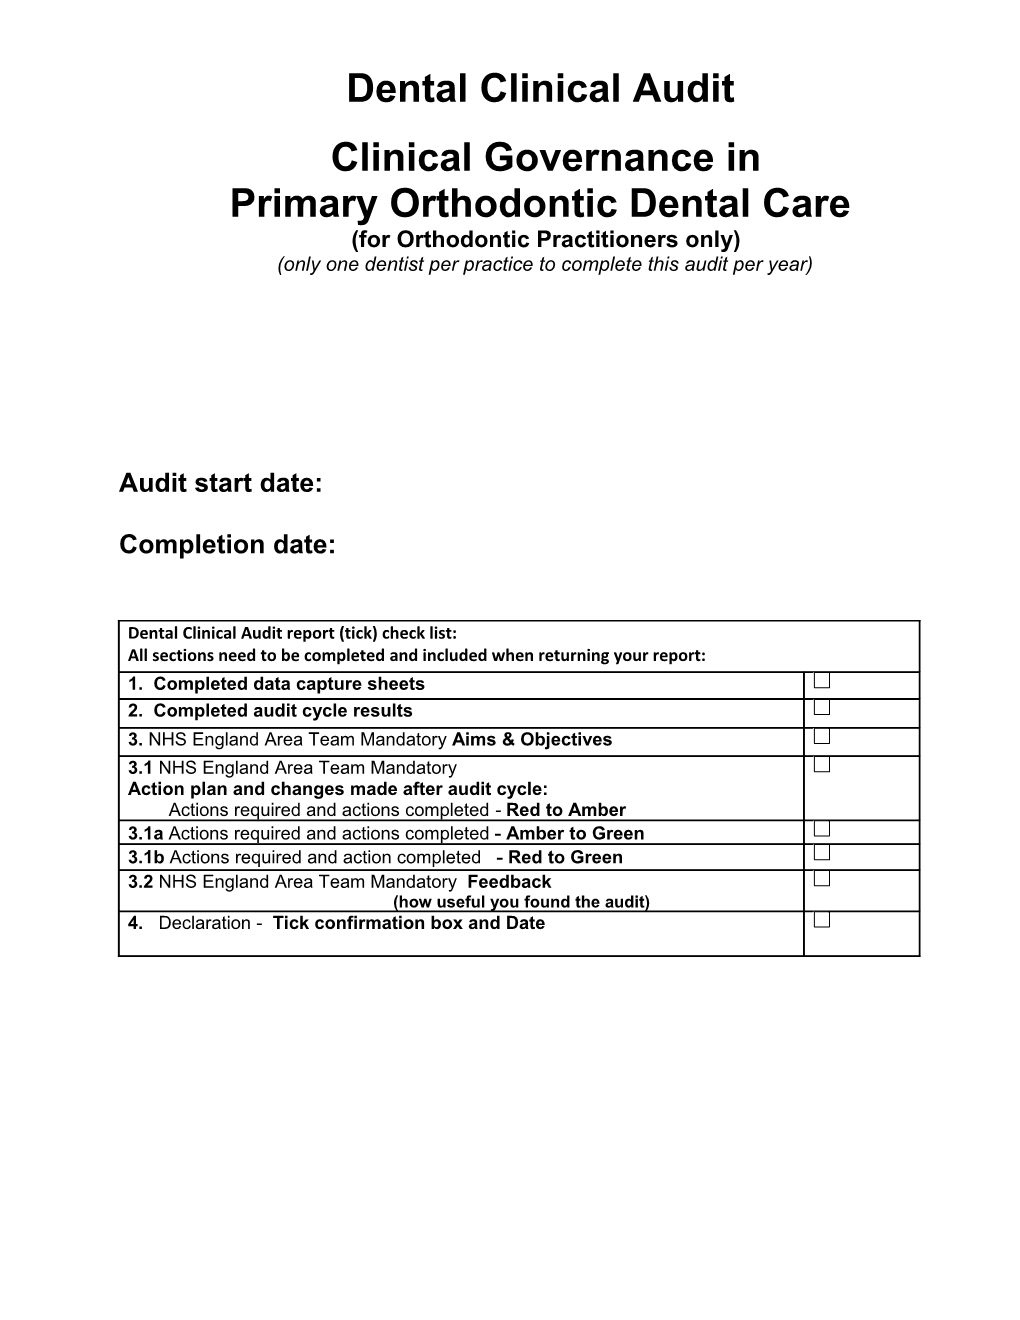 Clinical Audit for Pds Dental Performers